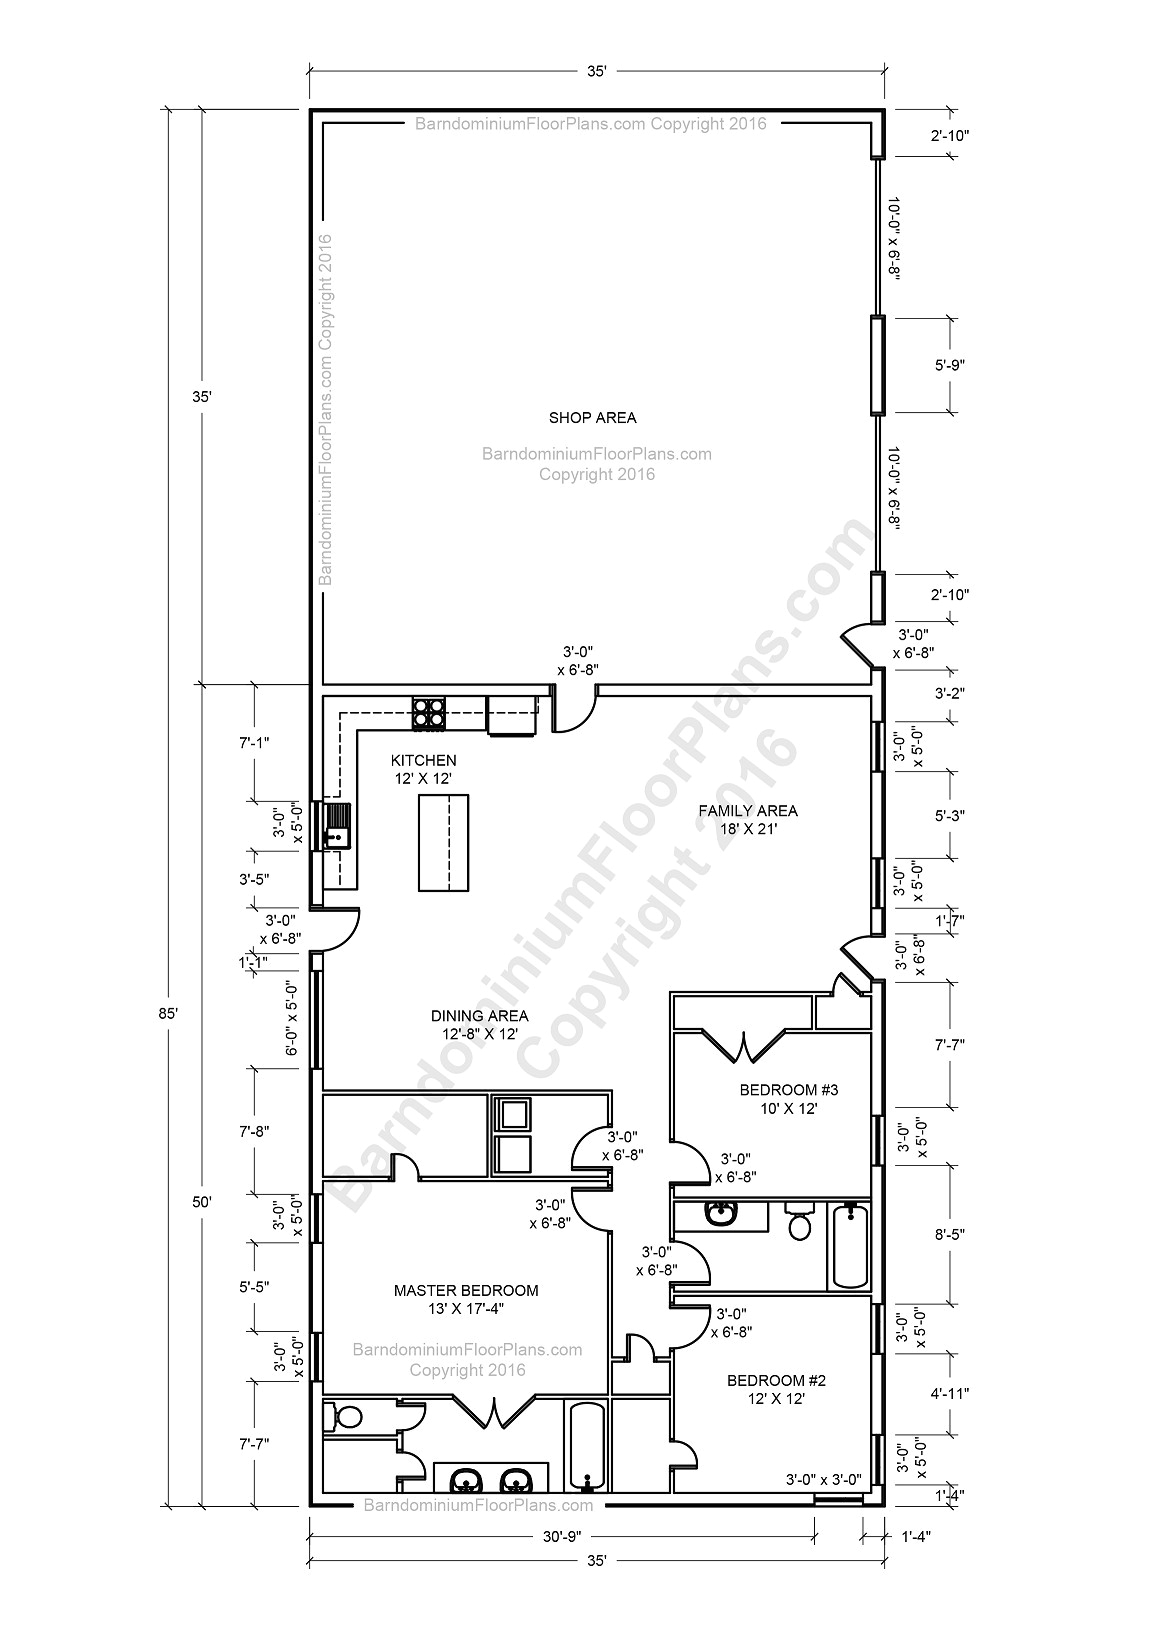 cvs floor plan awesome barn home plans with s s s media cache ak0 pinimg 736x cc 8b